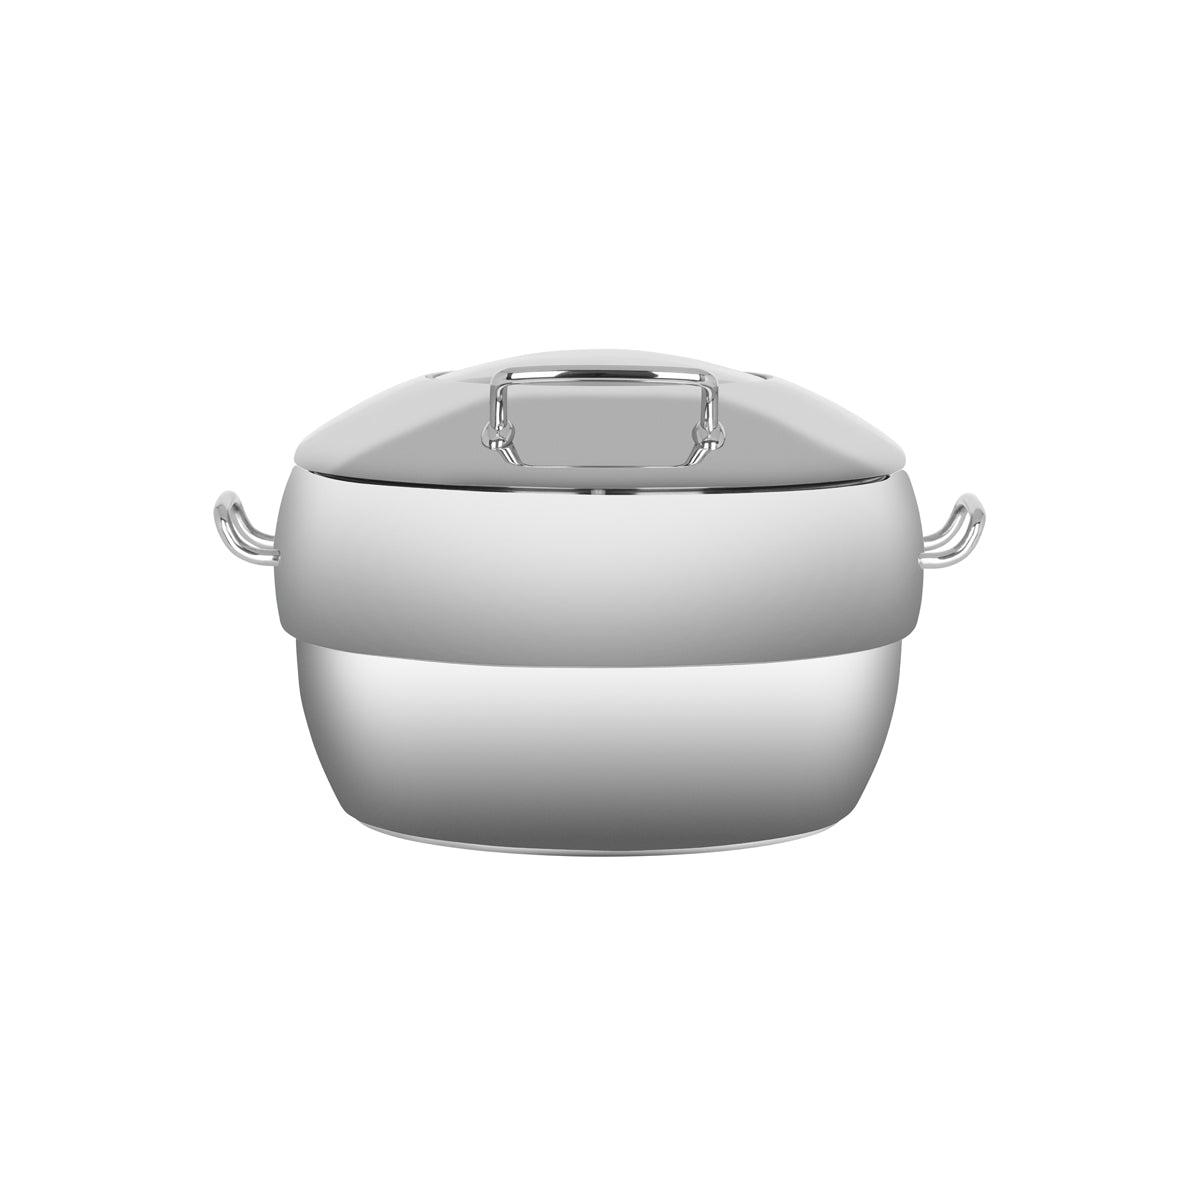 54929 Chef Inox Ultra Soup Station 18/8 Stainless Steel 11Lt with Glass Lid Tomkin Australia Hospitality Supplies